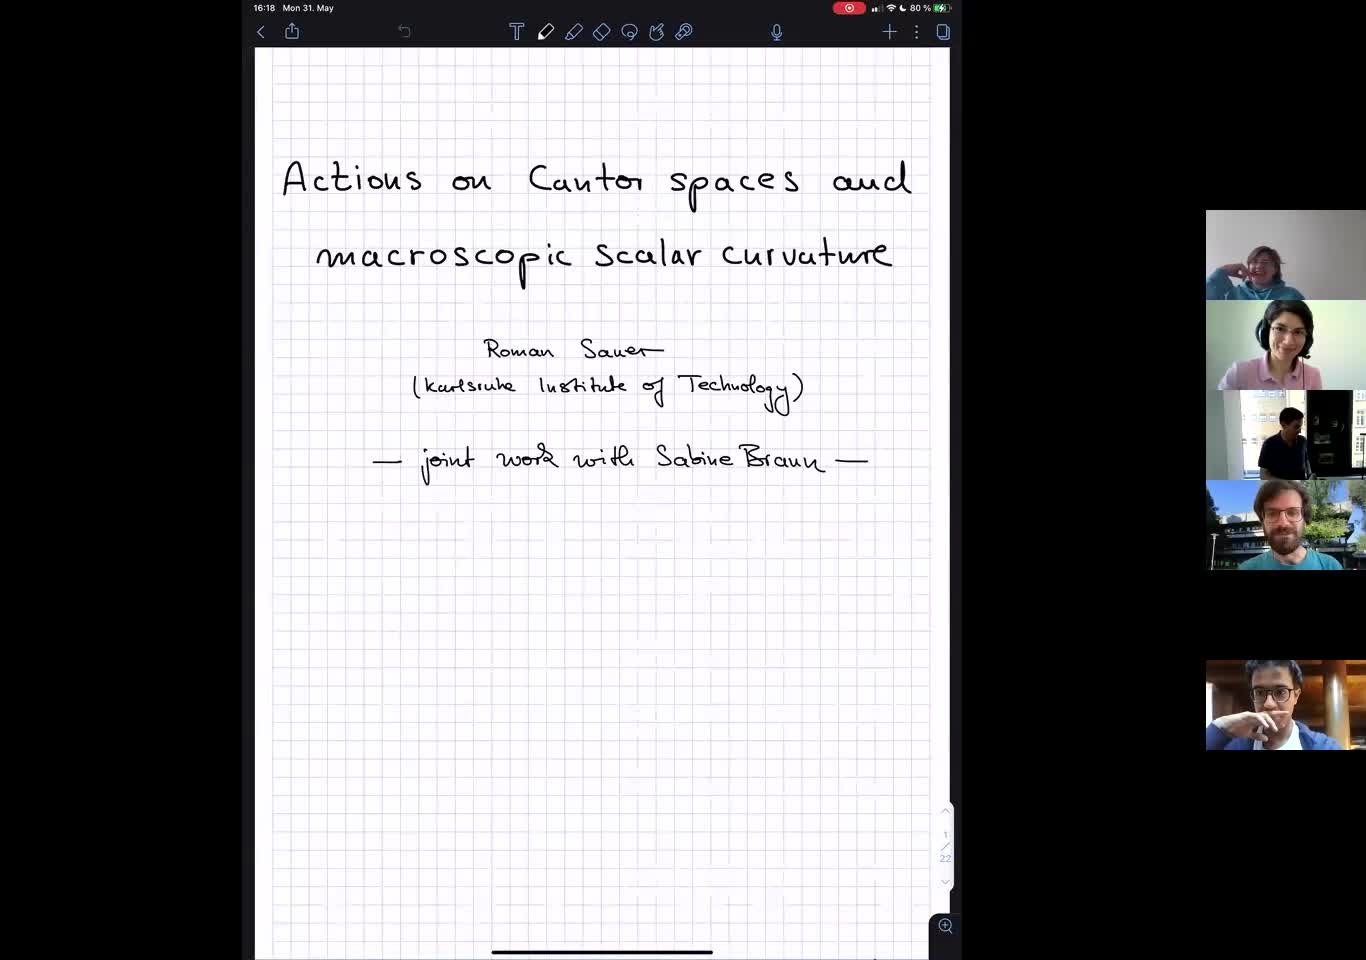 Actions on Cantor spaces and macroscopic scalar curvature